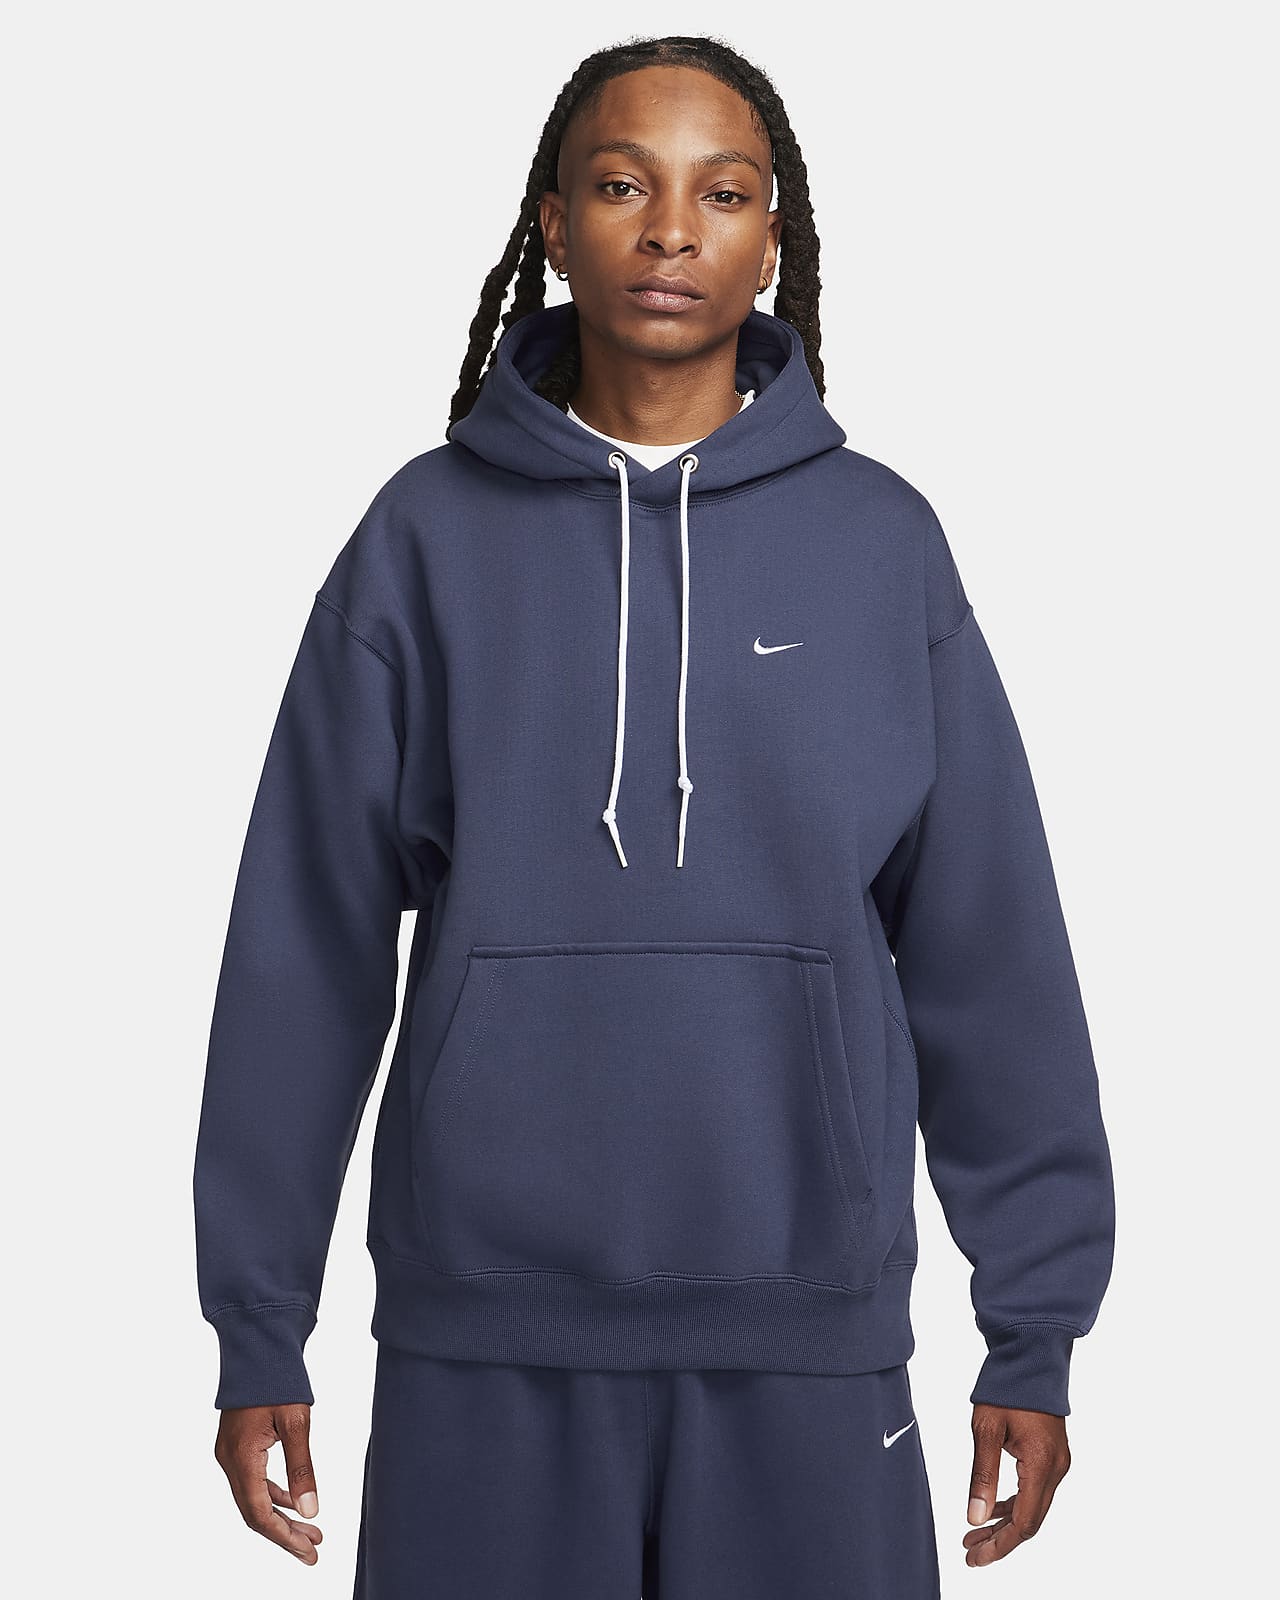 https://static.nike.com/a/images/t_PDP_1280_v1/f_auto,q_auto:eco/67cc4d92-f2bf-44af-b18b-0a241cbd4015/solo-swoosh-fleece-pullover-hoodie-PFZS96.png